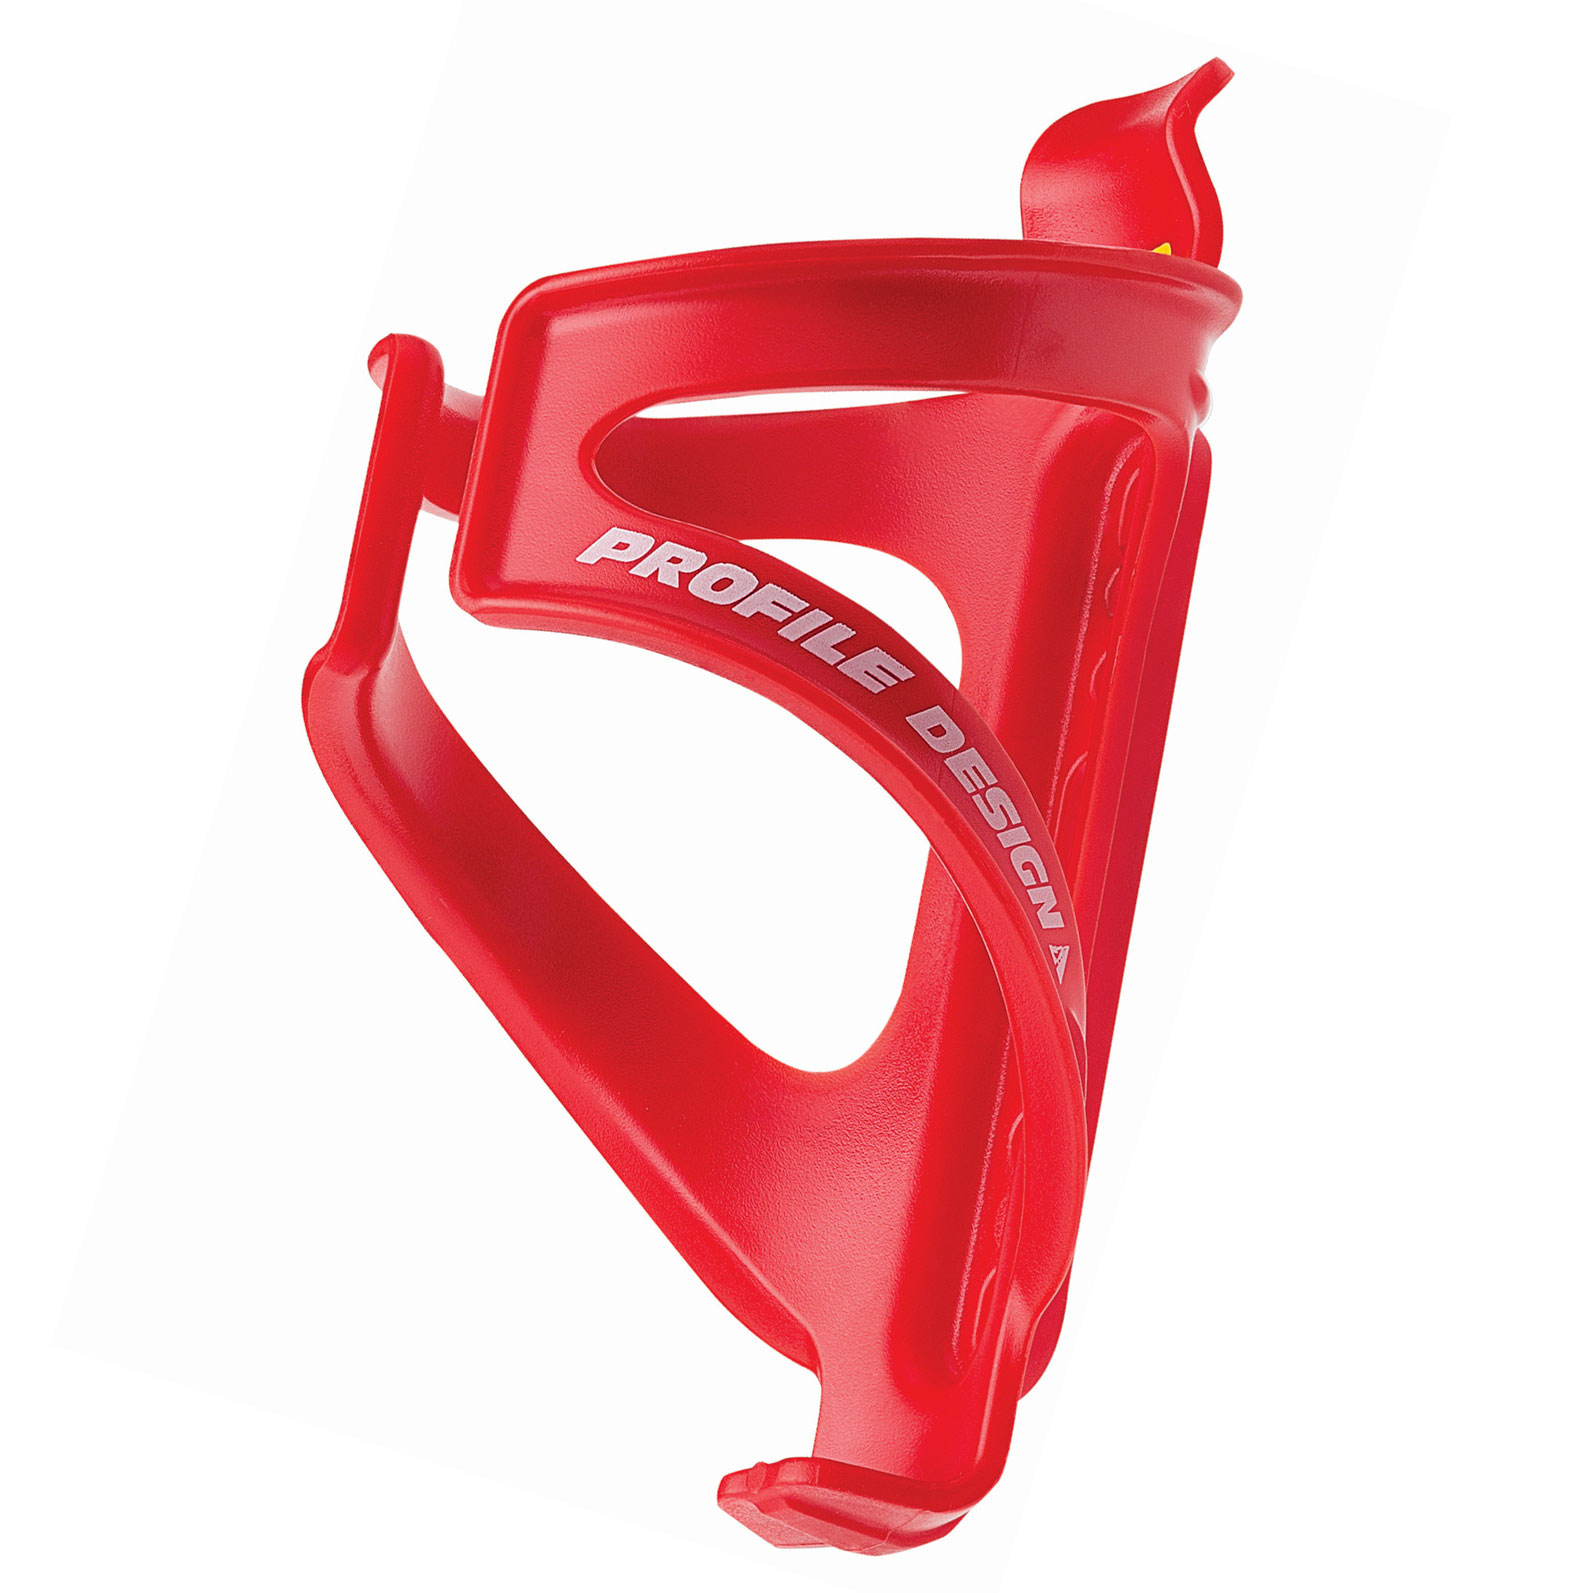 Picture of Profile Design Axis Kage Bottle Cage - red/white